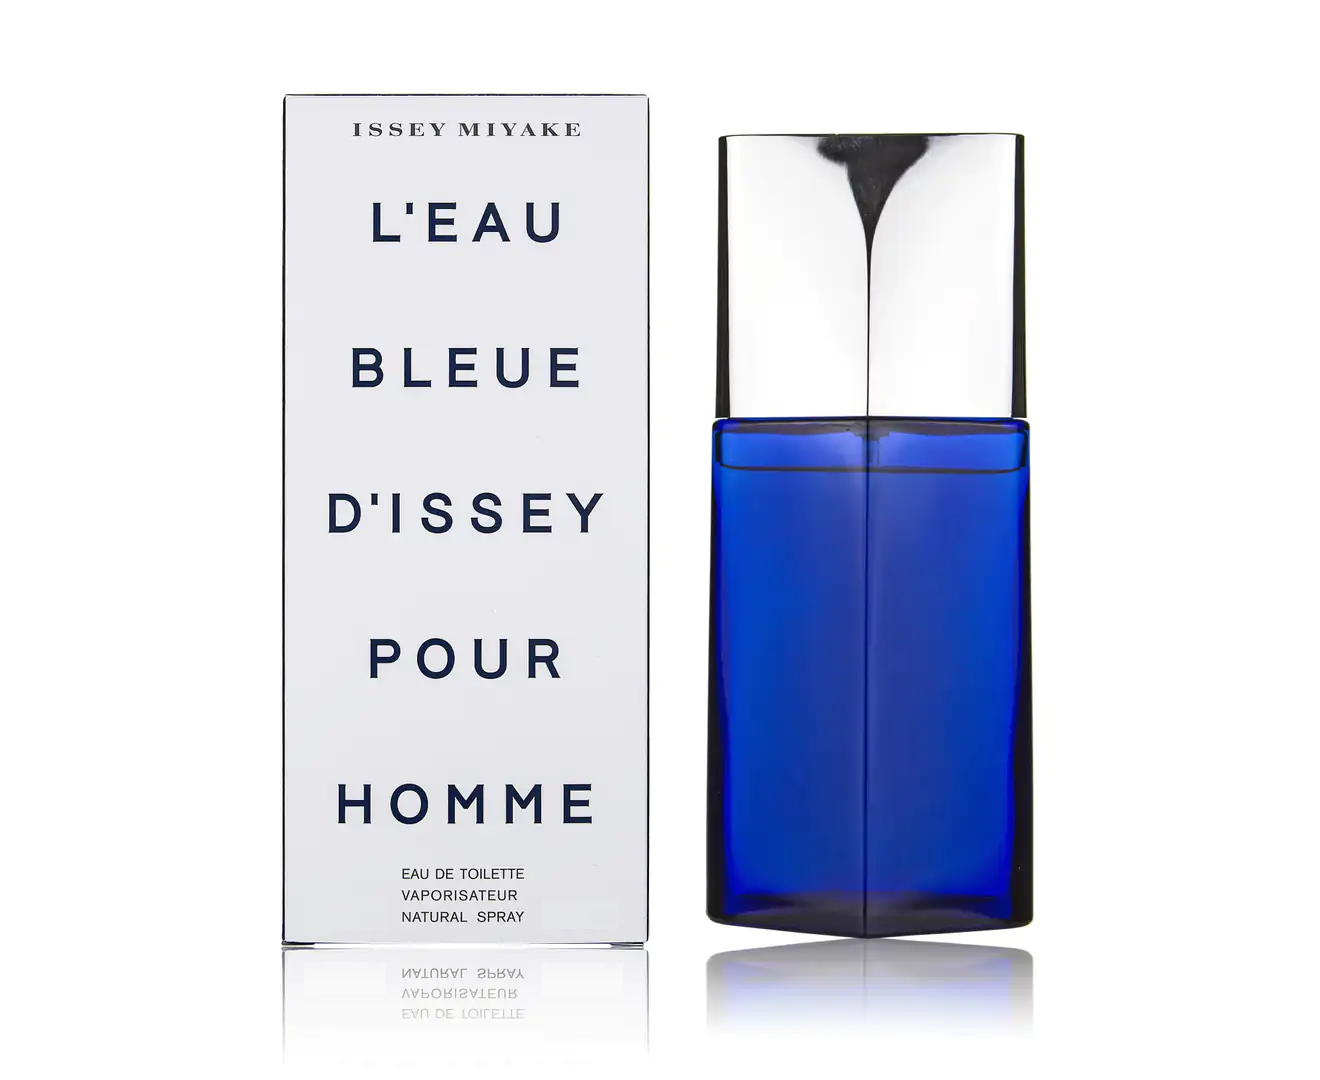 ISSEY MIYAKE Leau Bleue Dissey Pour Homme EDT 75ml Fragrance Spray for Men